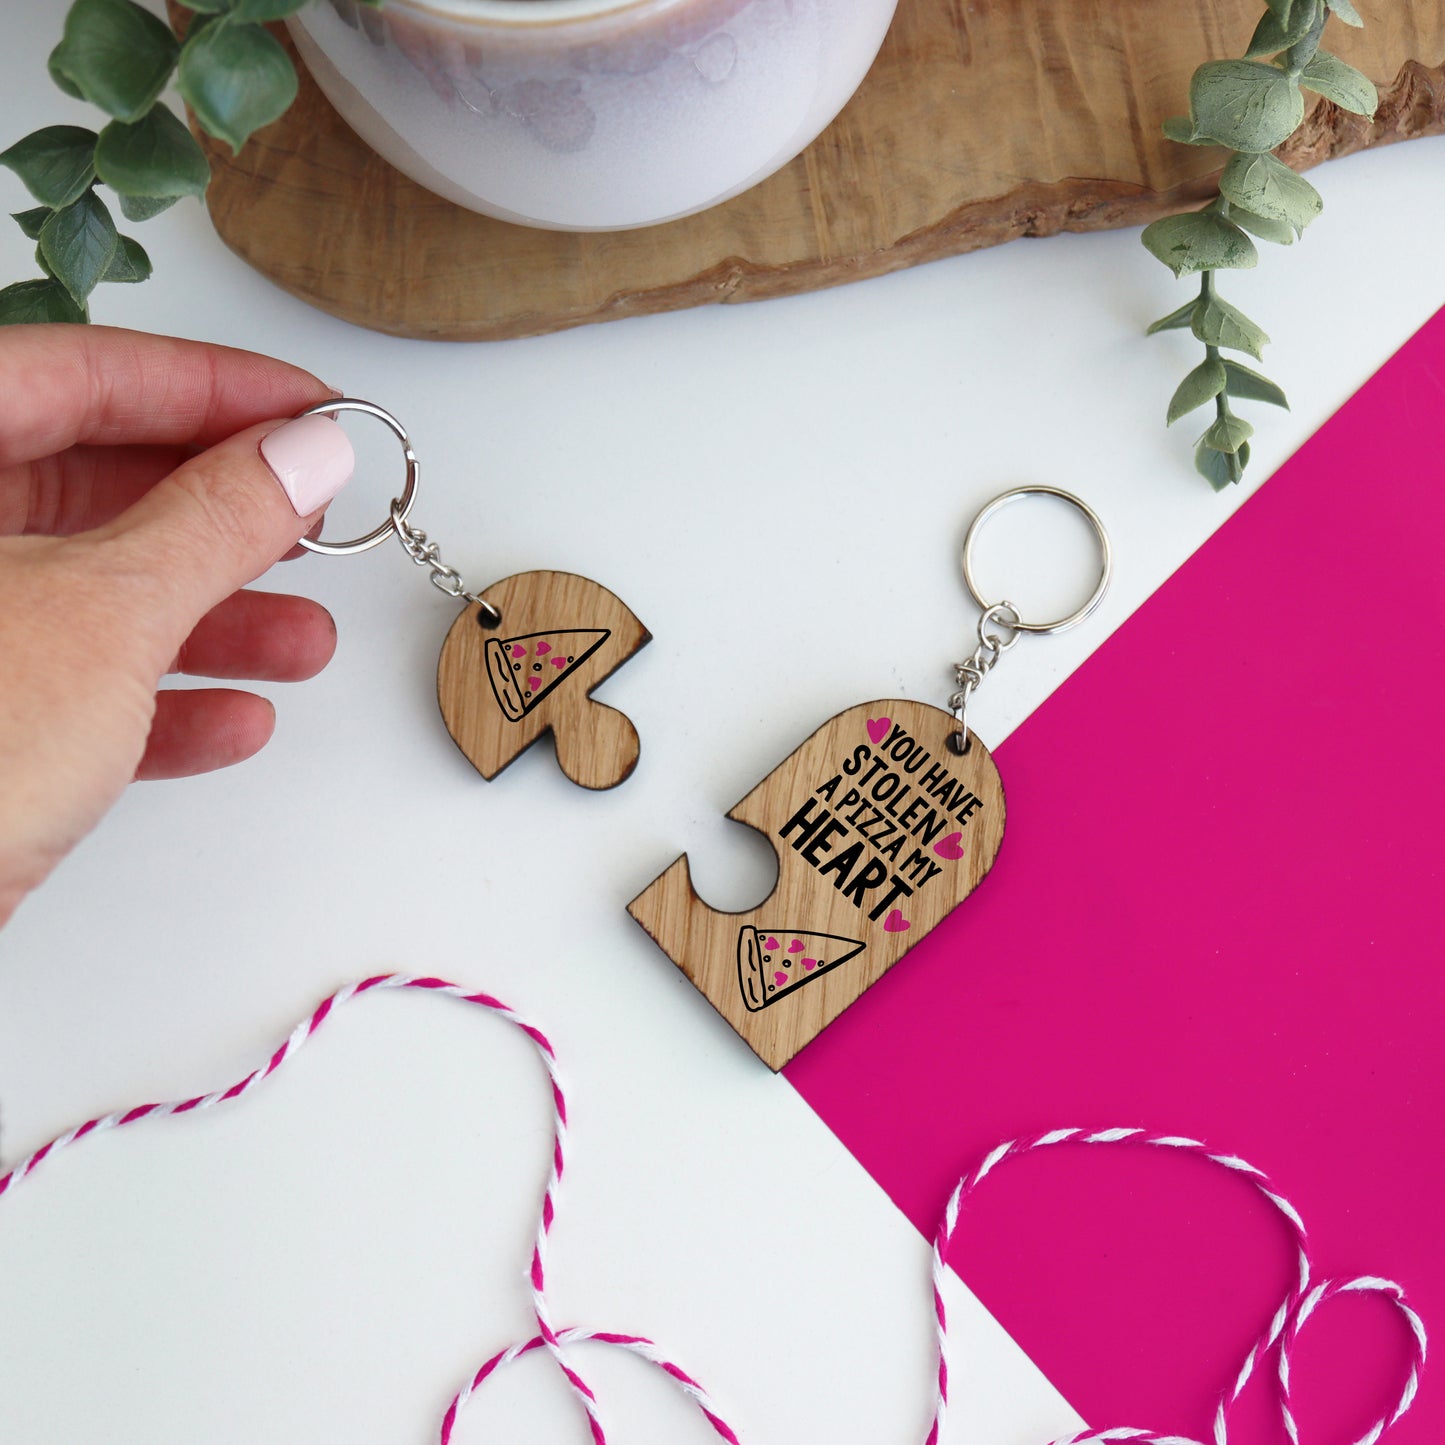 stolen a pizza my heart couples keyrings wooden valentines key ring with two parts cut from a heart shape